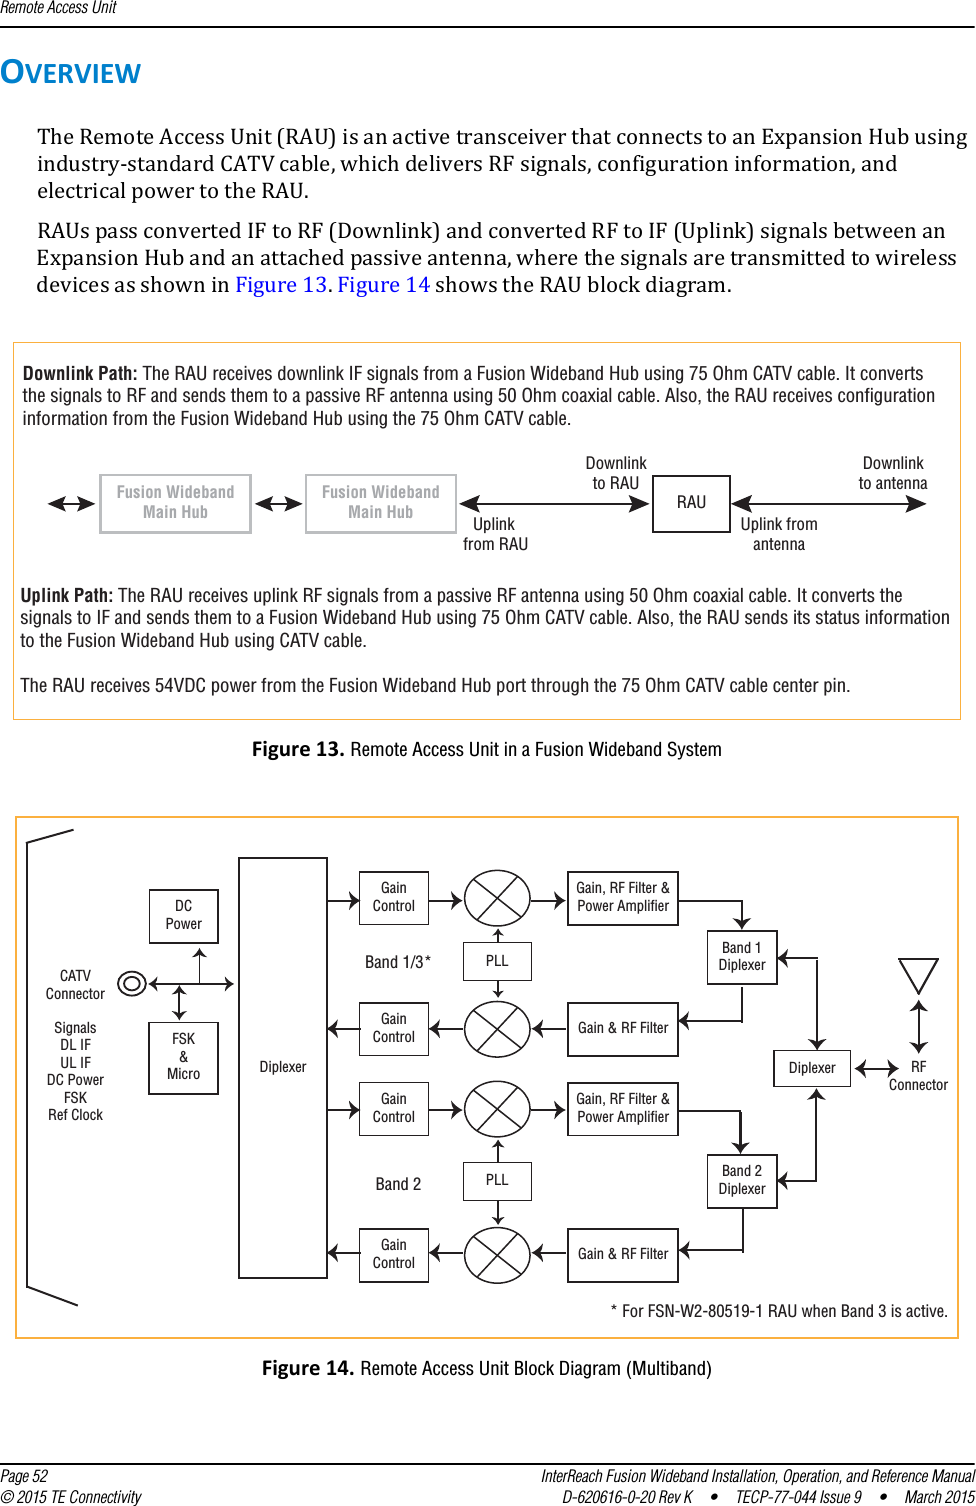 Remote Access Unit  Page 52 InterReach Fusion Wideband Installation, Operation, and Reference Manual© 2015 TE Connectivity D-620616-0-20 Rev K  •  TECP-77-044 Issue 9  •  March 2015OVERVIEWThe Remote Access Unit (RAU) is an active transceiver that connects to an Expansion Hub using industry-standard CATV cable, which delivers RF signals, configuration information, and electrical power to the RAU.RAUs pass converted IF to RF (Downlink) and converted RF to IF (Uplink) signals between an Expansion Hub and an attached passive antenna, where the signals are transmitted to wireless devices as shown in Figure 13. Figure 14 shows the RAU block diagram.Figure 13. Remote Access Unit in a Fusion Wideband SystemFigure 14. Remote Access Unit Block Diagram (Multiband)Downlink Path: The RAU receives downlink IF signals from a Fusion Wideband Hub using 75 Ohm CATV cable. It converts the signals to RF and sends them to a passive RF antenna using 50 Ohm coaxial cable. Also, the RAU receives configuration information from the Fusion Wideband Hub using the 75 Ohm CATV cable.Uplink Path: The RAU receives uplink RF signals from a passive RF antenna using 50 Ohm coaxial cable. It converts the signals to IF and sends them to a Fusion Wideband Hub using 75 Ohm CATV cable. Also, the RAU sends its status information to the Fusion Wideband Hub using CATV cable.The RAU receives 54VDC power from the Fusion Wideband Hub port through the 75 Ohm CATV cable center pin.Downlinkto RAUUplink from RAUFusion WidebandMain Hub RAUFusion WidebandMain HubDownlinkto antennaUplink fromantennaDiplexerGainControlGainControlGainControlGainControlDCPowerFSK&amp;MicroGain, RF Filter &amp;Power AmplifierPLLPLLGain &amp; RF FilterGain, RF Filter &amp;Power AmplifierGain &amp; RF FilterBand 1DiplexerBand 2DiplexerDiplexer RFConnectorCATVConnectorSignalsDL IFUL IFDC PowerFSKRef ClockBand 1/3*Band 2* For FSN-W2-80519-1 RAU when Band 3 is active.